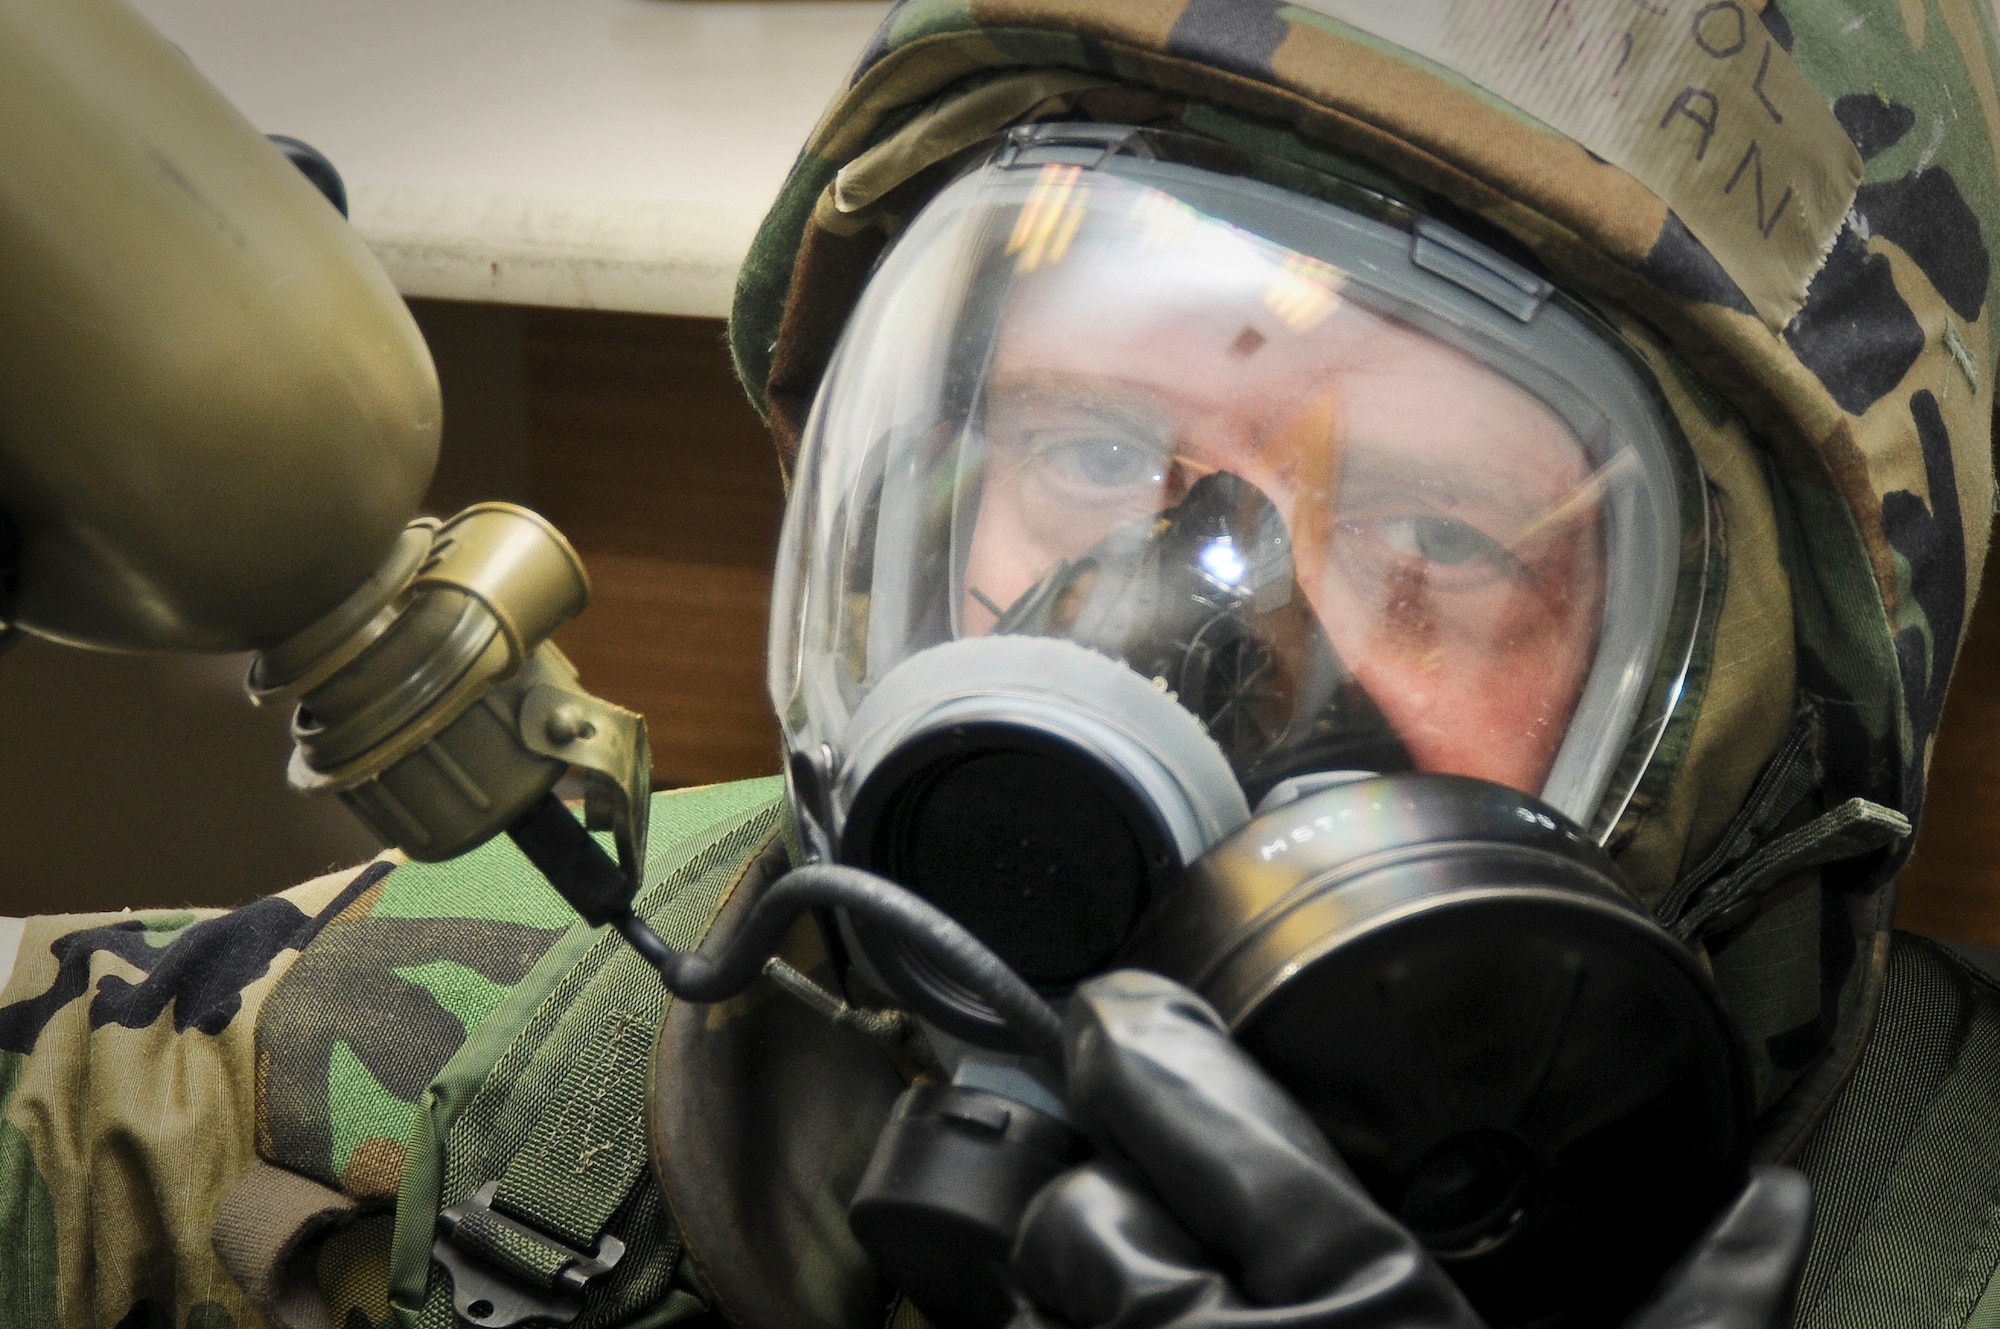 123rd Airlift Wing Chaplain (Lt. Col.) Fred Ehrman takes a drink from his canteen May 21, 2010 while under MOPP 4 conditions following a simulated chemical-weapons attack at the Gulfport Combat Readiness Training Center in Gulfport, Miss. The simulated attack was part of an Air Mobility Command Operational Readiness Inspection. (U.S. Air Force photo/Tech. Sgt. Dennis Flora)(Released)